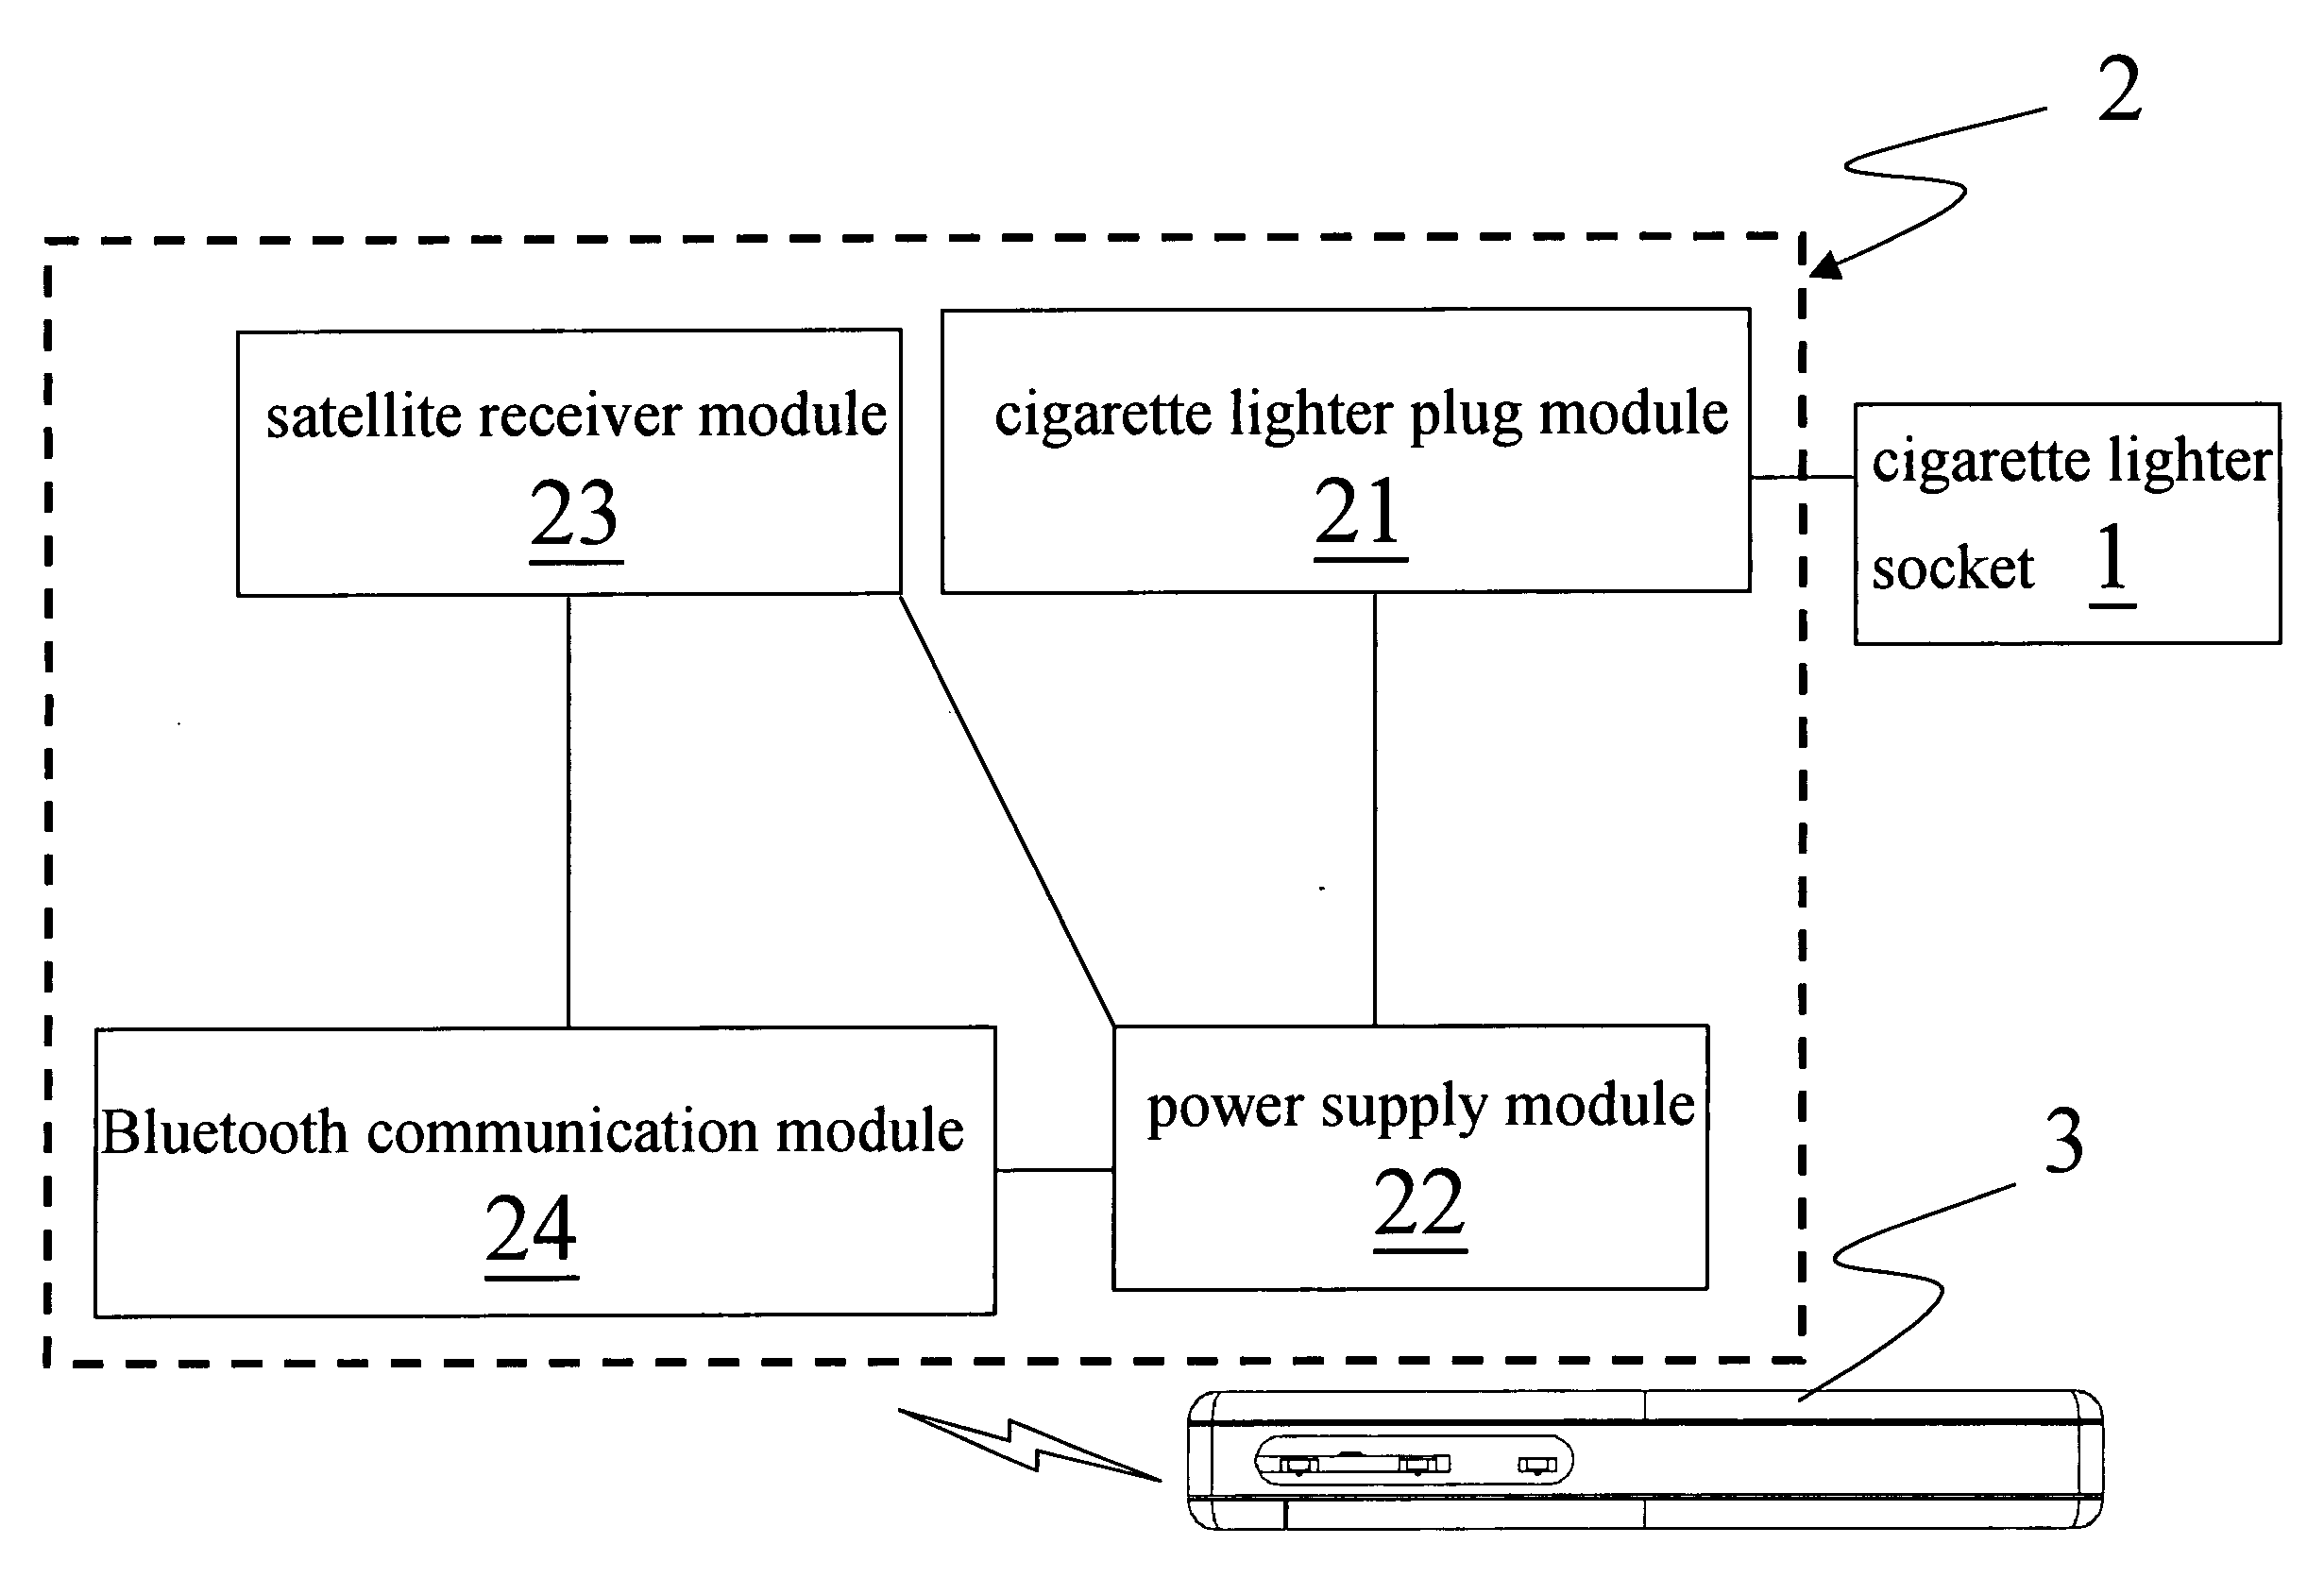 Bluetooth satellite receiver device powered by a cigarette lighter socket